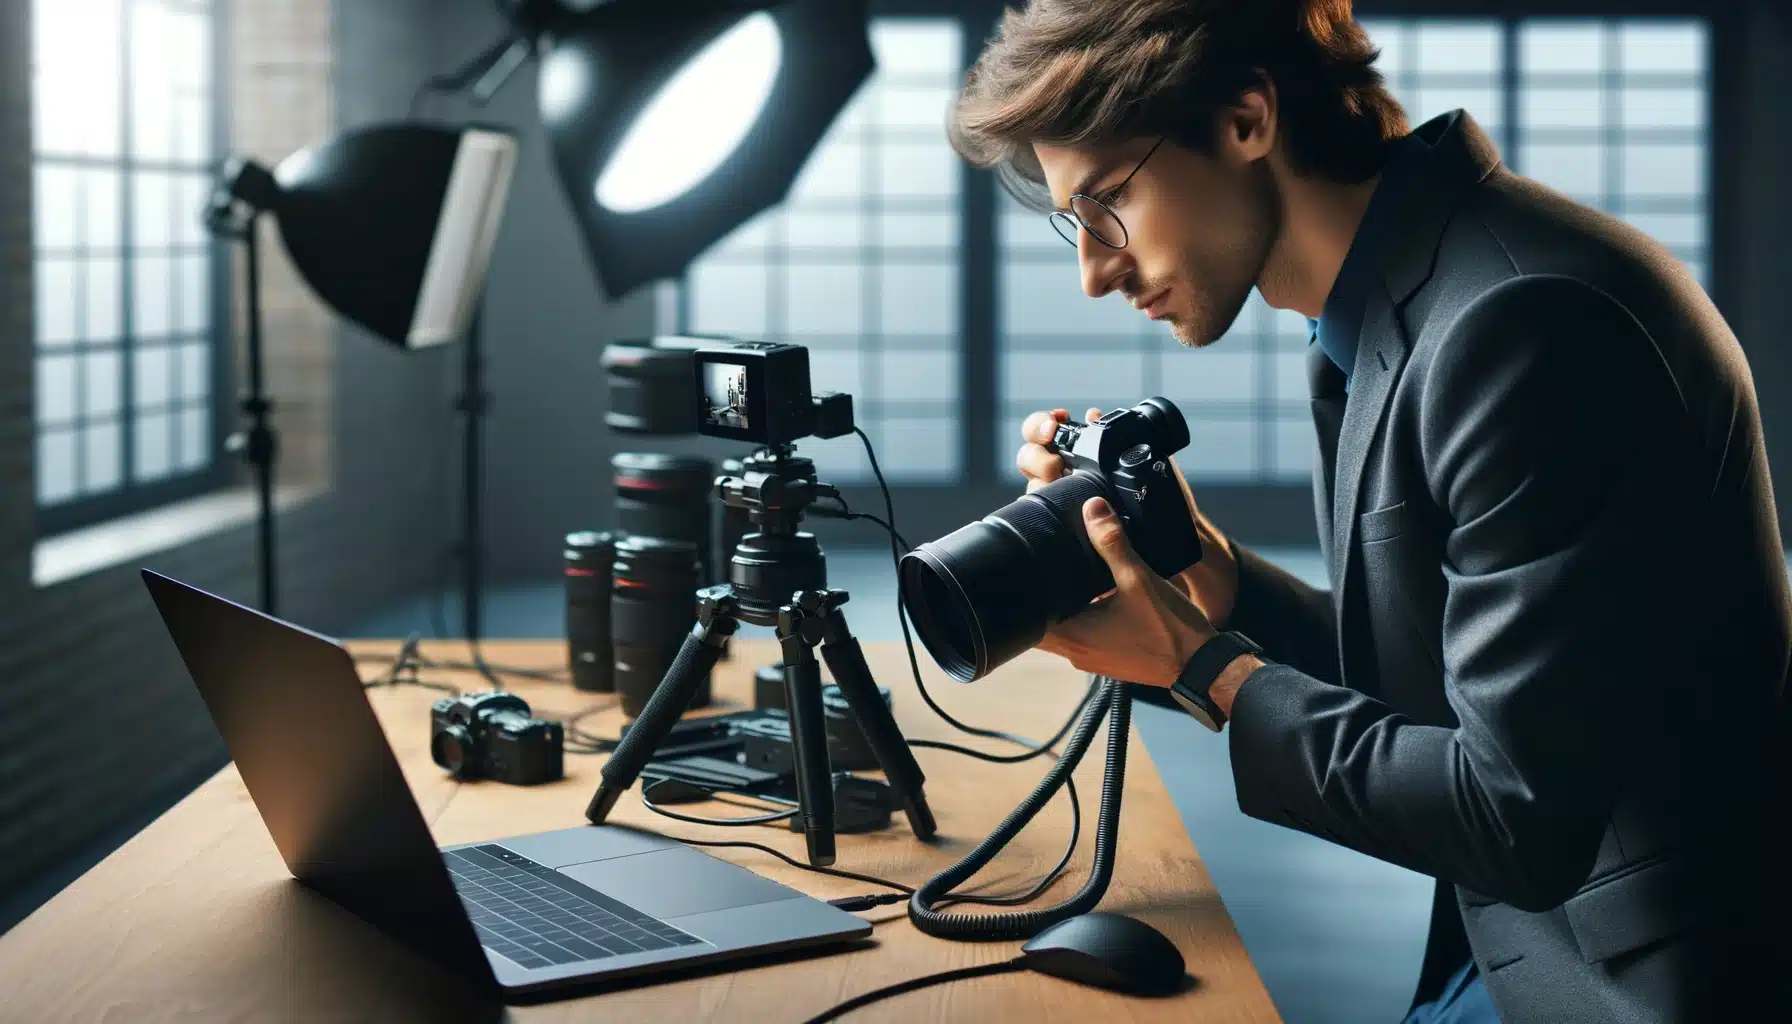 Professional photographer setting up a camera tethering system in an office, adjusting a camera connected to a laptop showing live images.